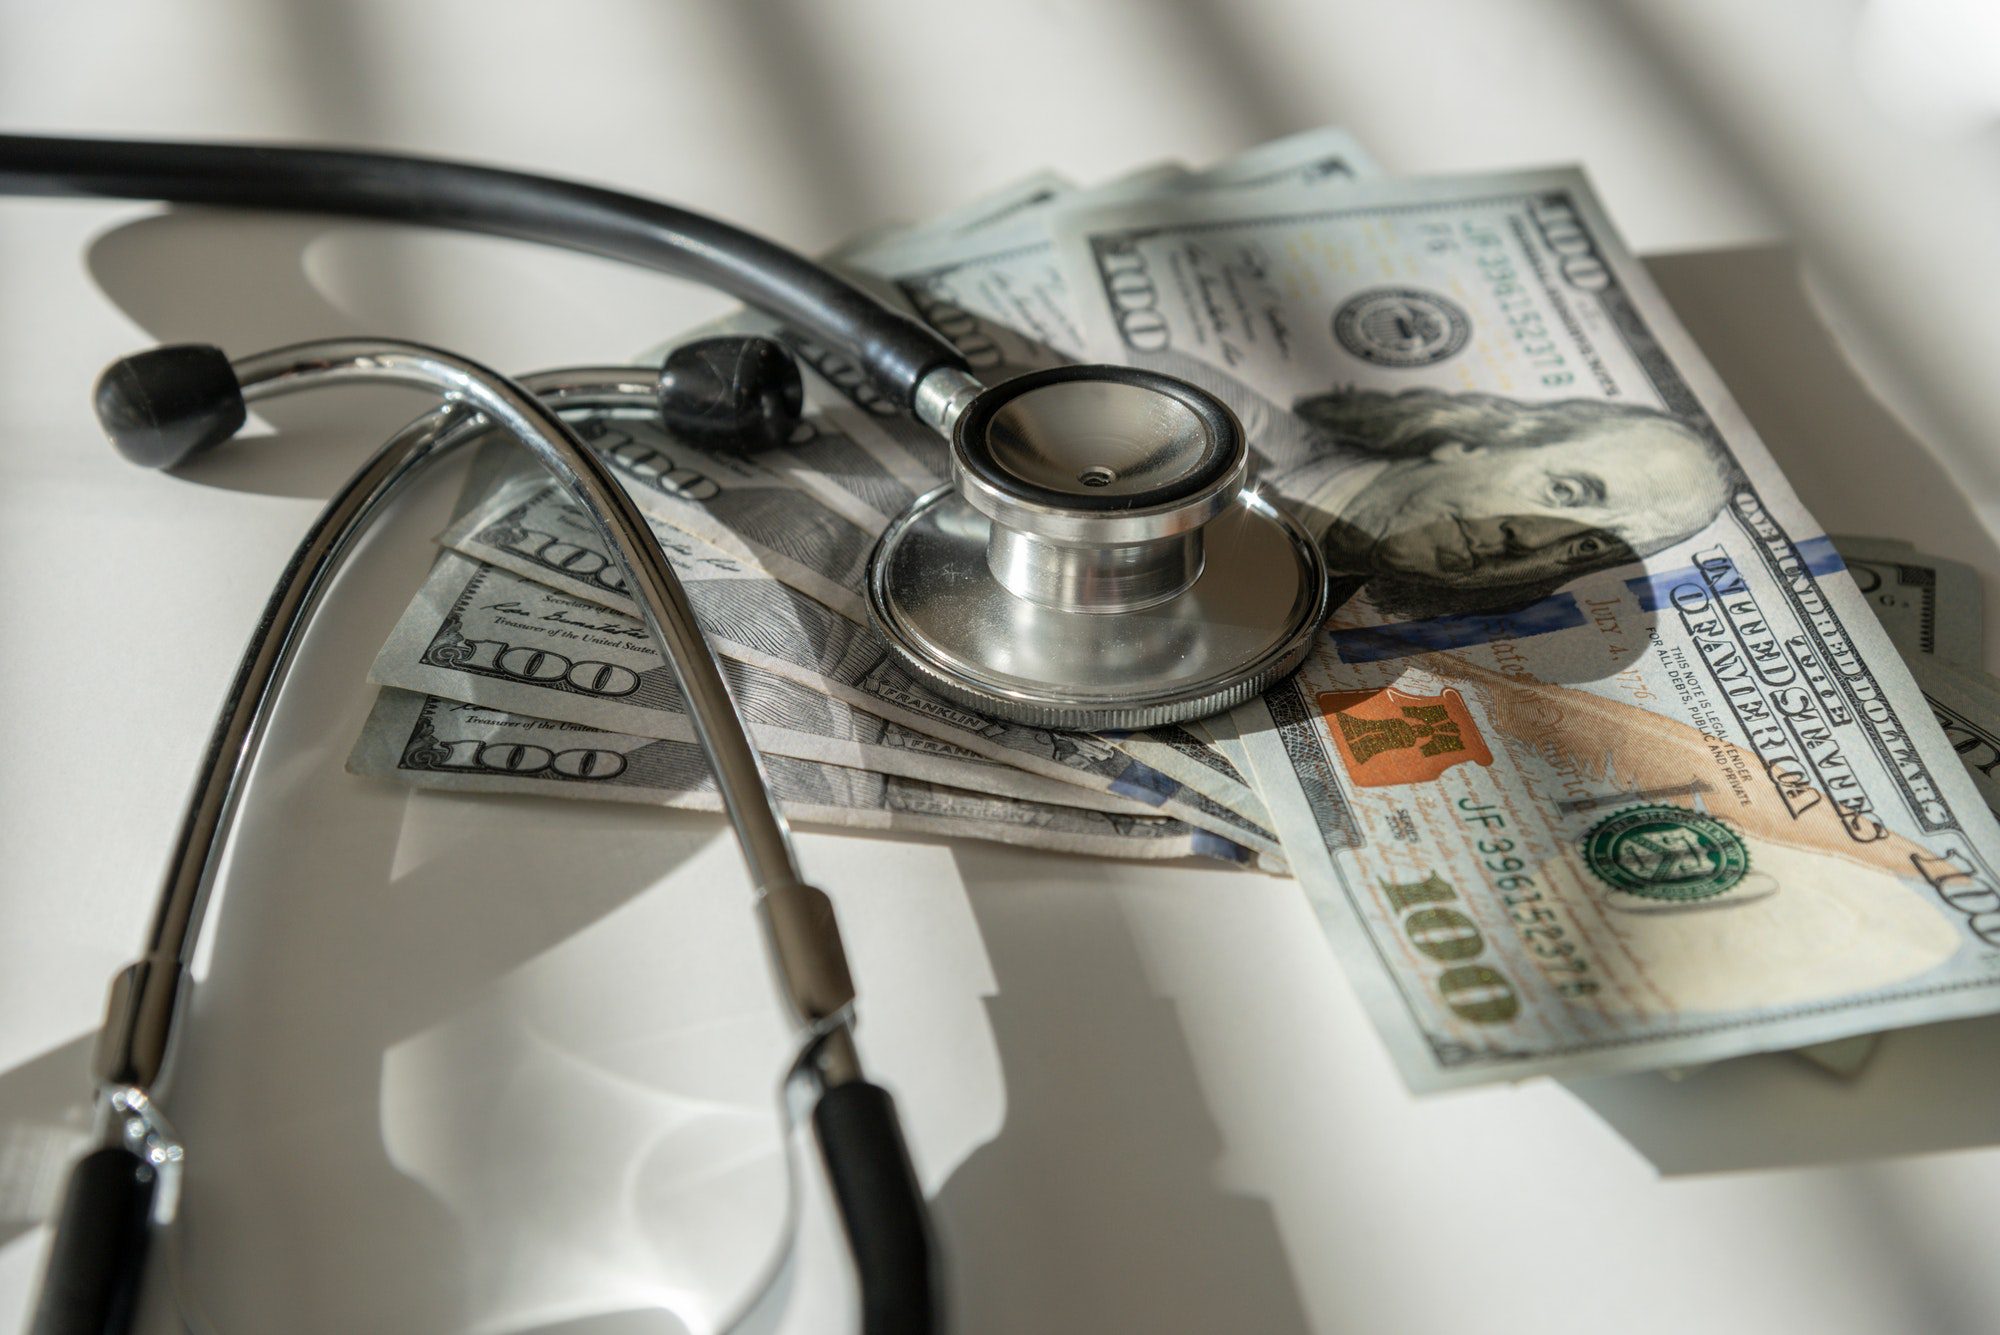 Stethoscope and money representing the cost of Medicare Part C and D in 2022